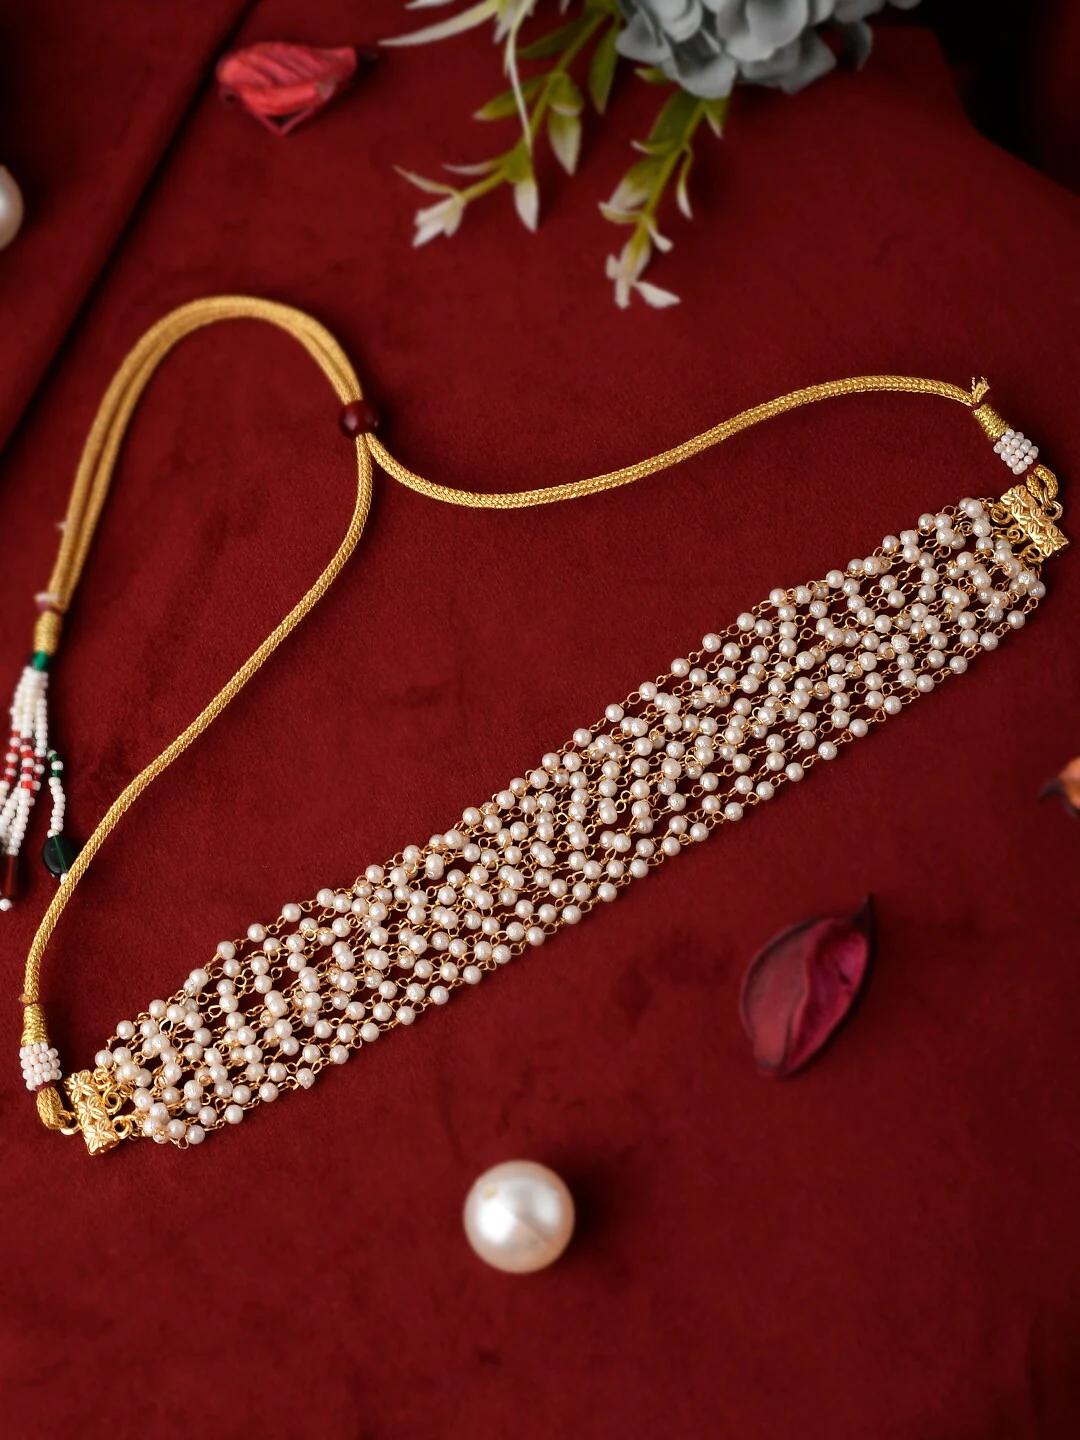 Shoshaa Gold-Plated Handcrafted Beaded Choker Necklace